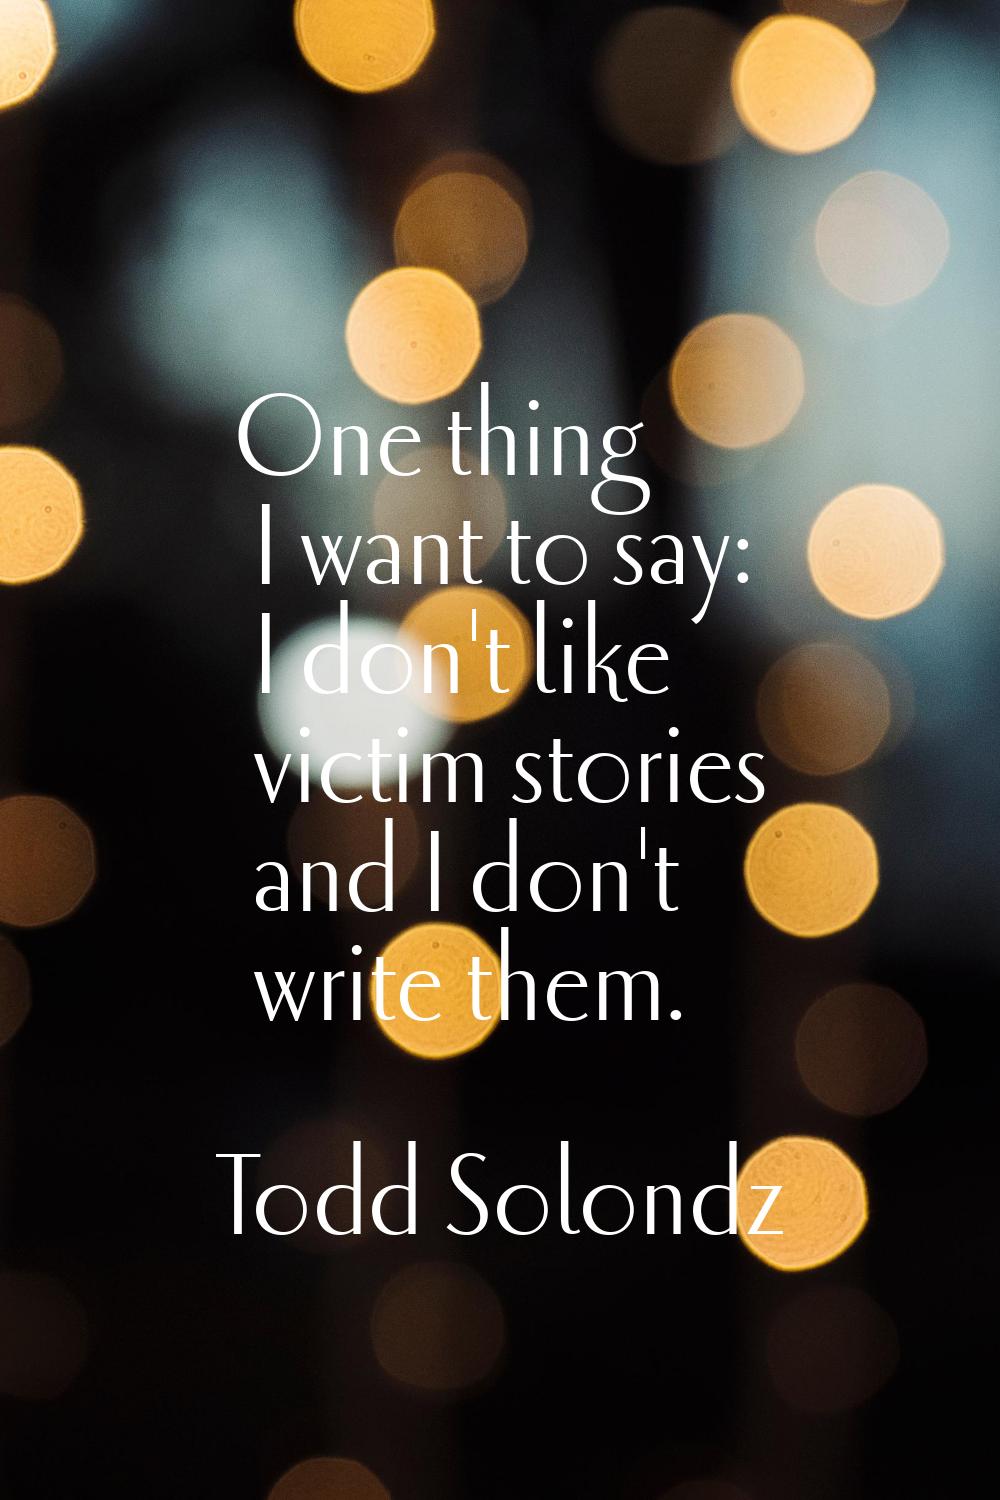 One thing I want to say: I don't like victim stories and I don't write them.